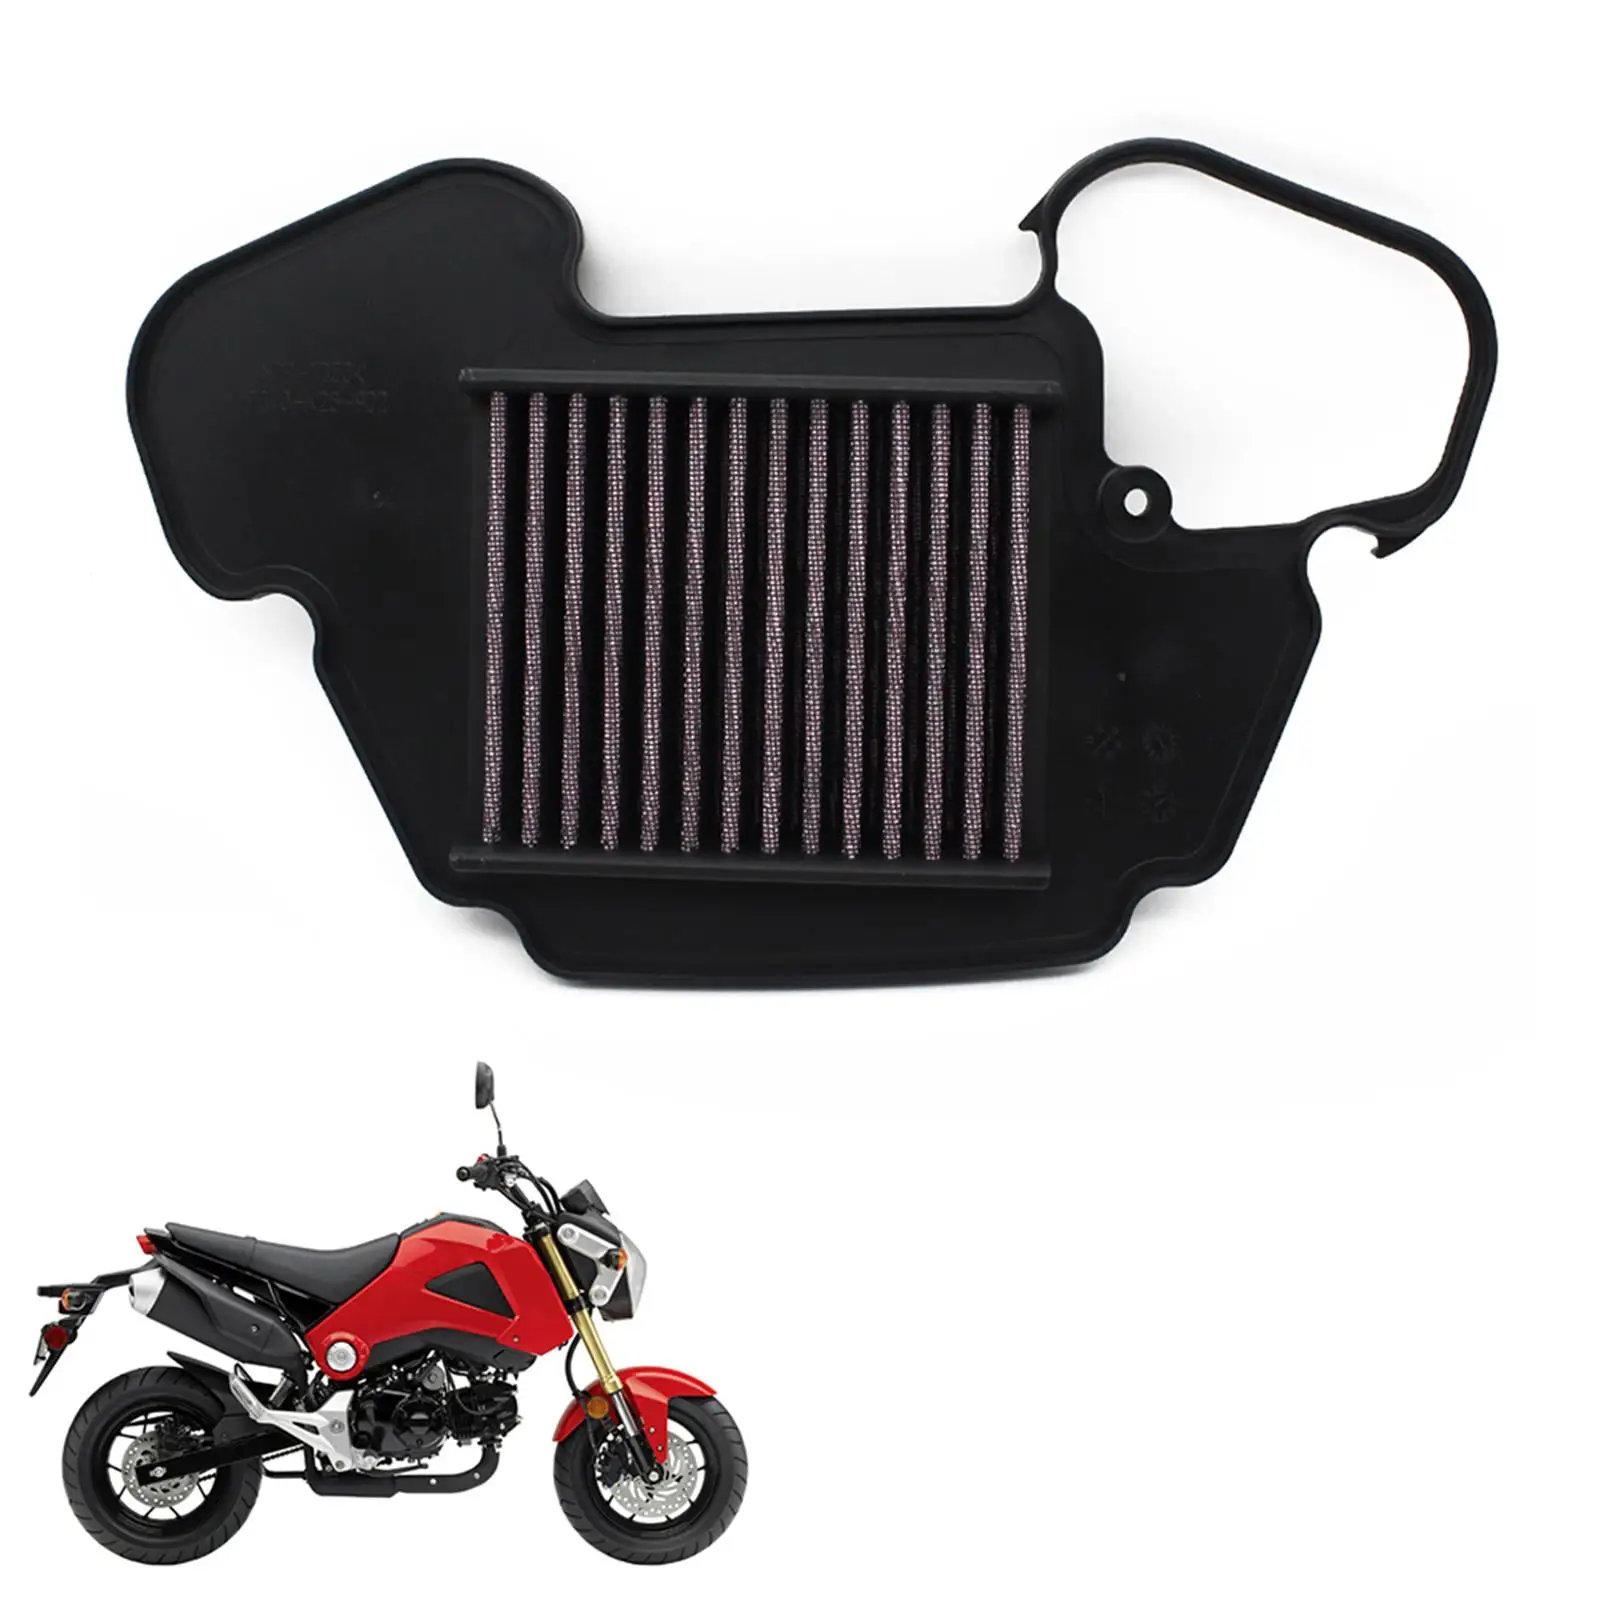 Motorcycle Air Intake Filter Cleaner Element for Honda Msx125 Grom